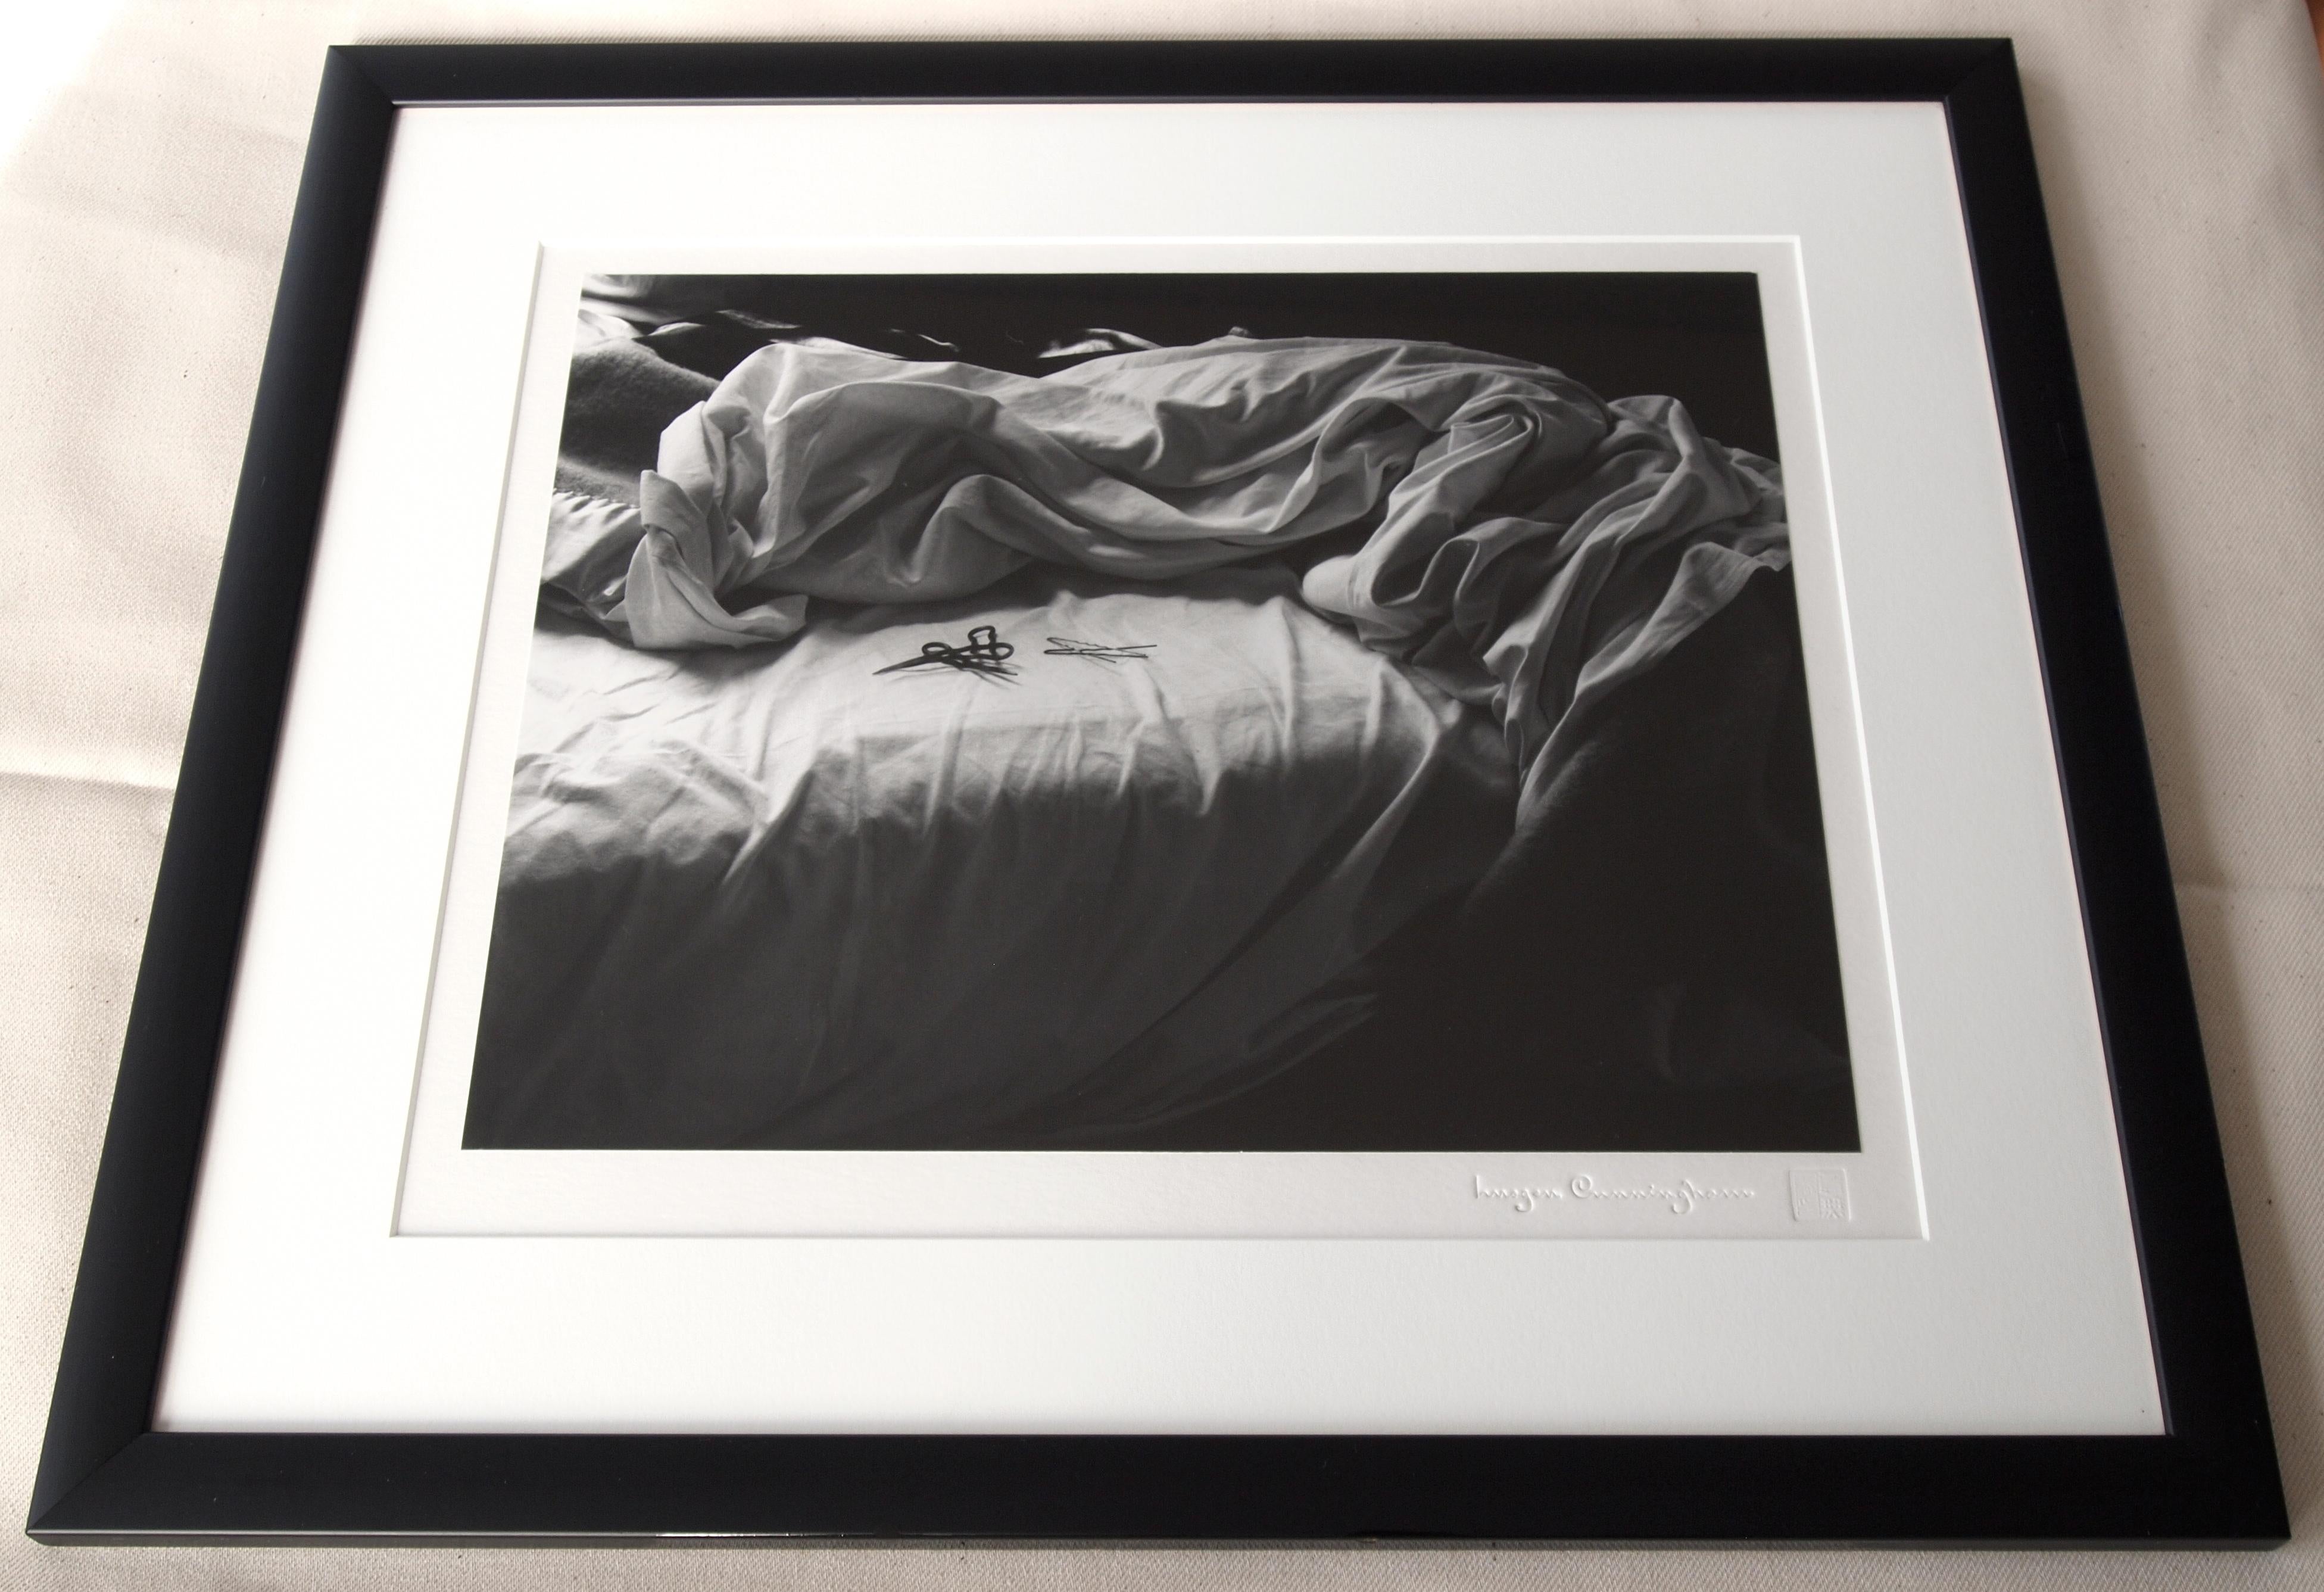 'The Unmade Bed' - Silver gelatin print by Imogen Cunningham, 1957. Estate print from Imogen’s original negative, with her debossed signature and chop mark l/r. ( 12.75